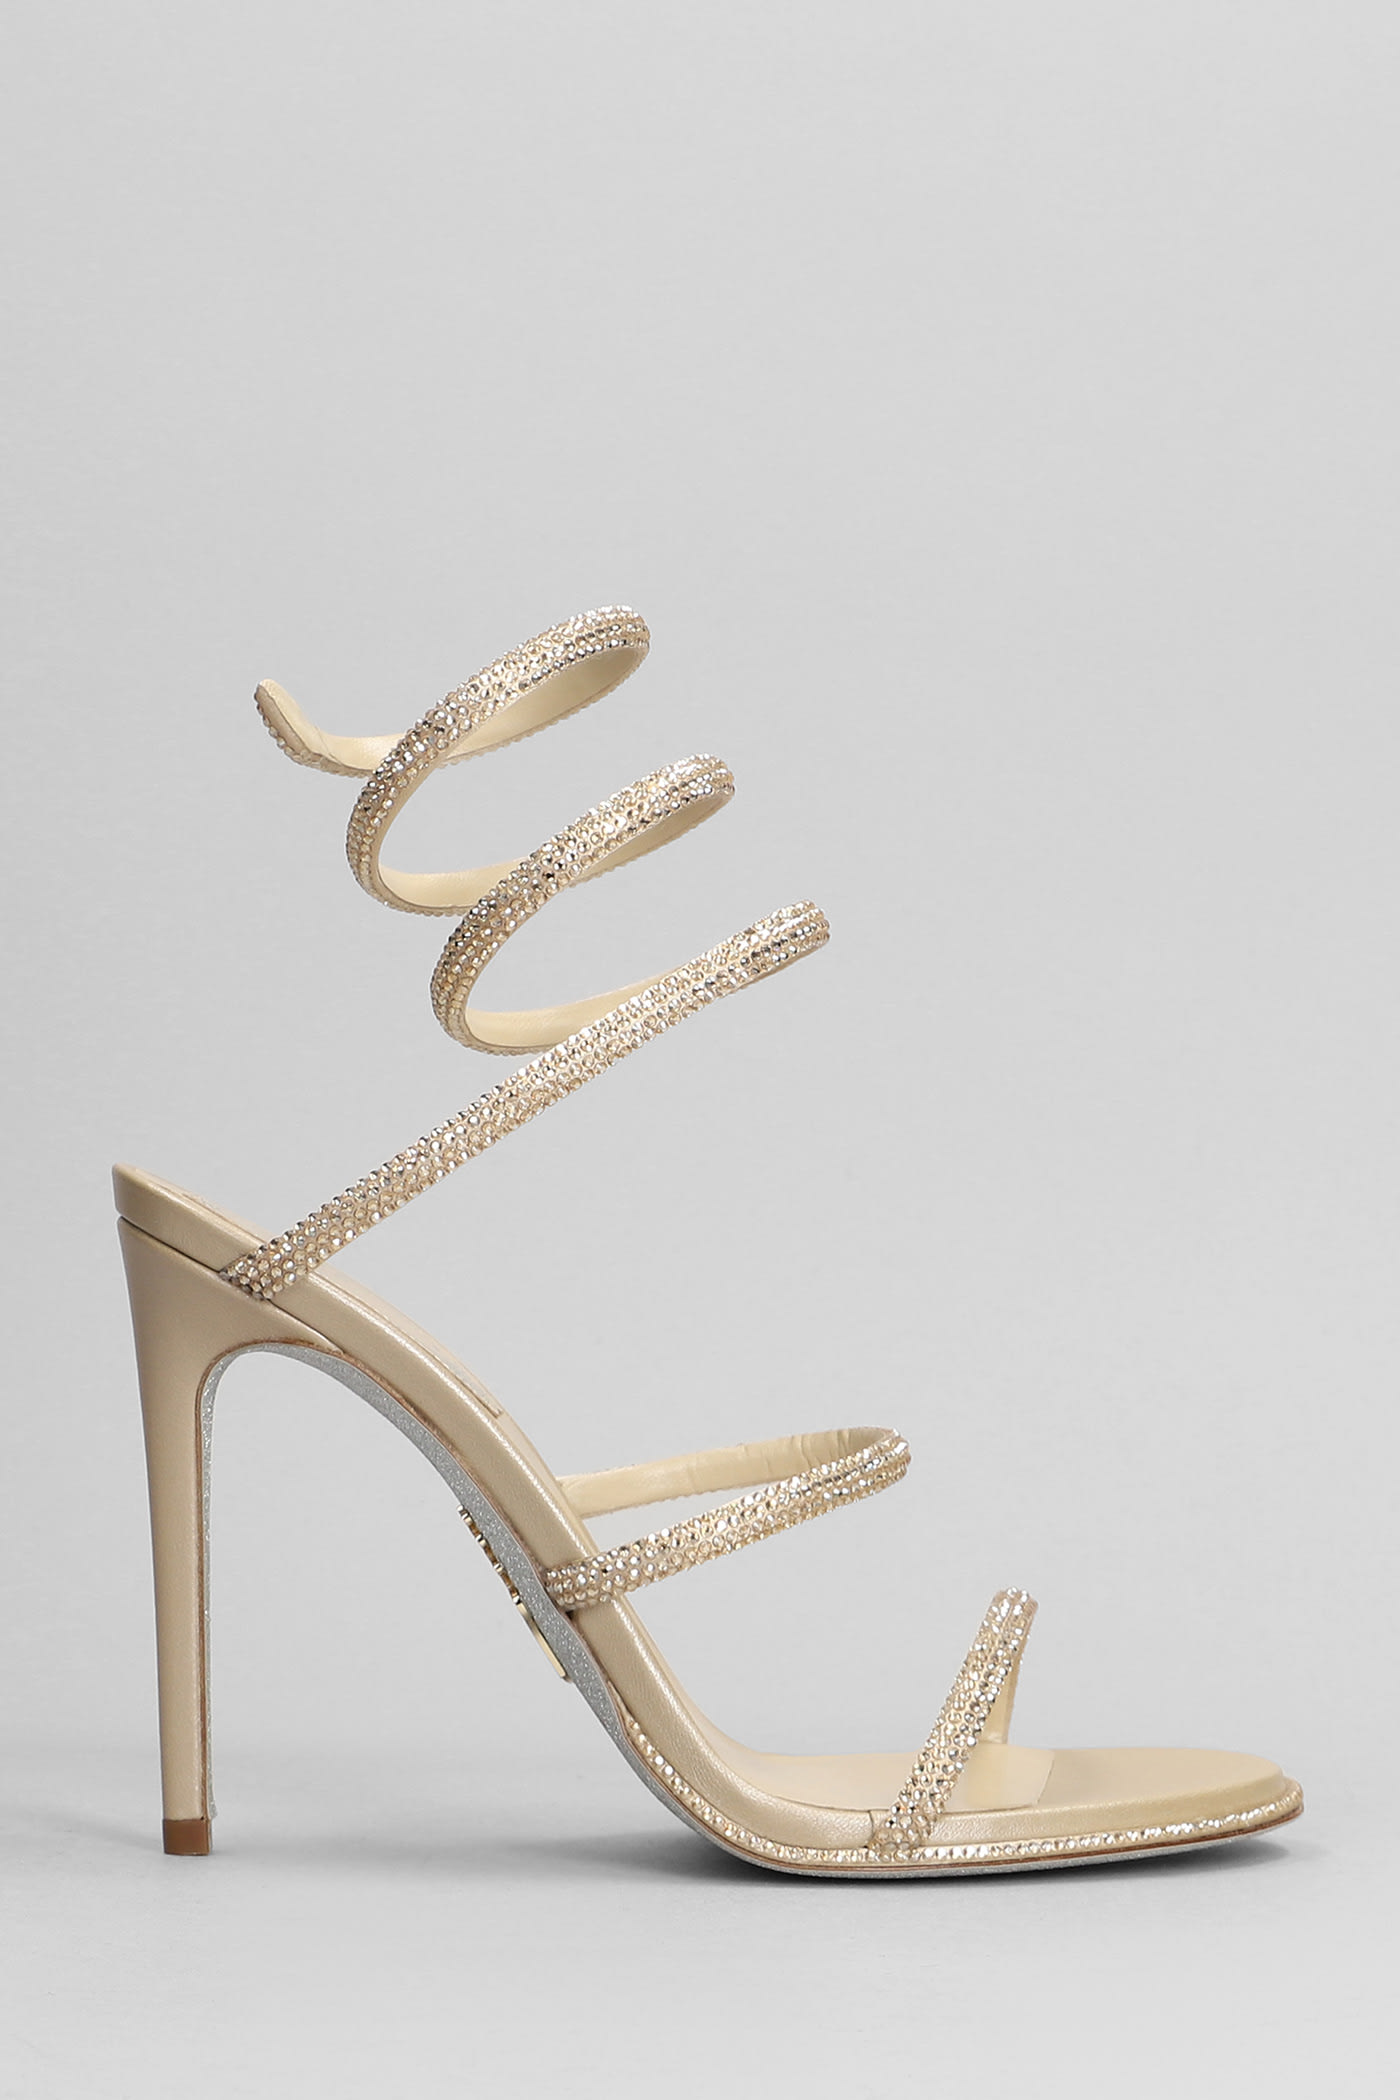 René Caovilla Cleo Sandals In Beige Leather